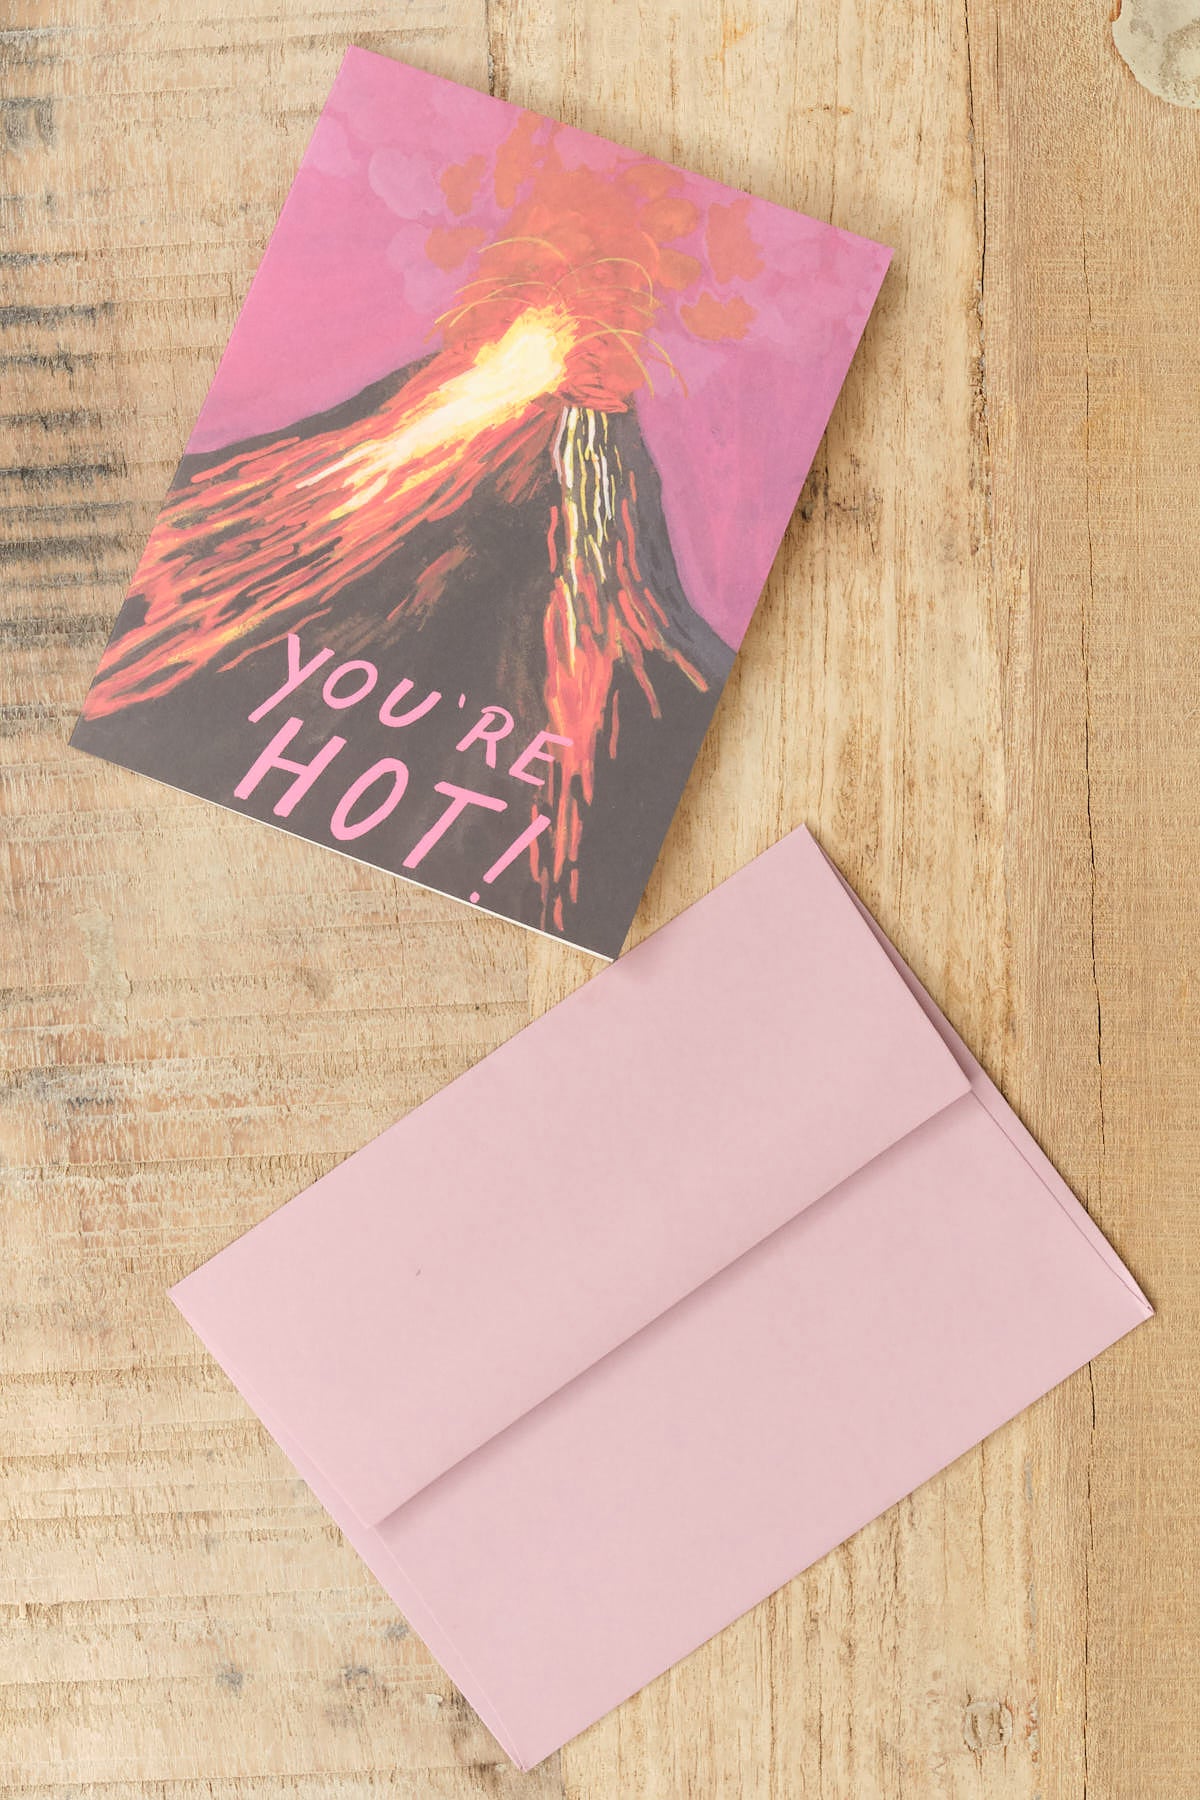 Volcanos Are Hot Card by Small Adventure